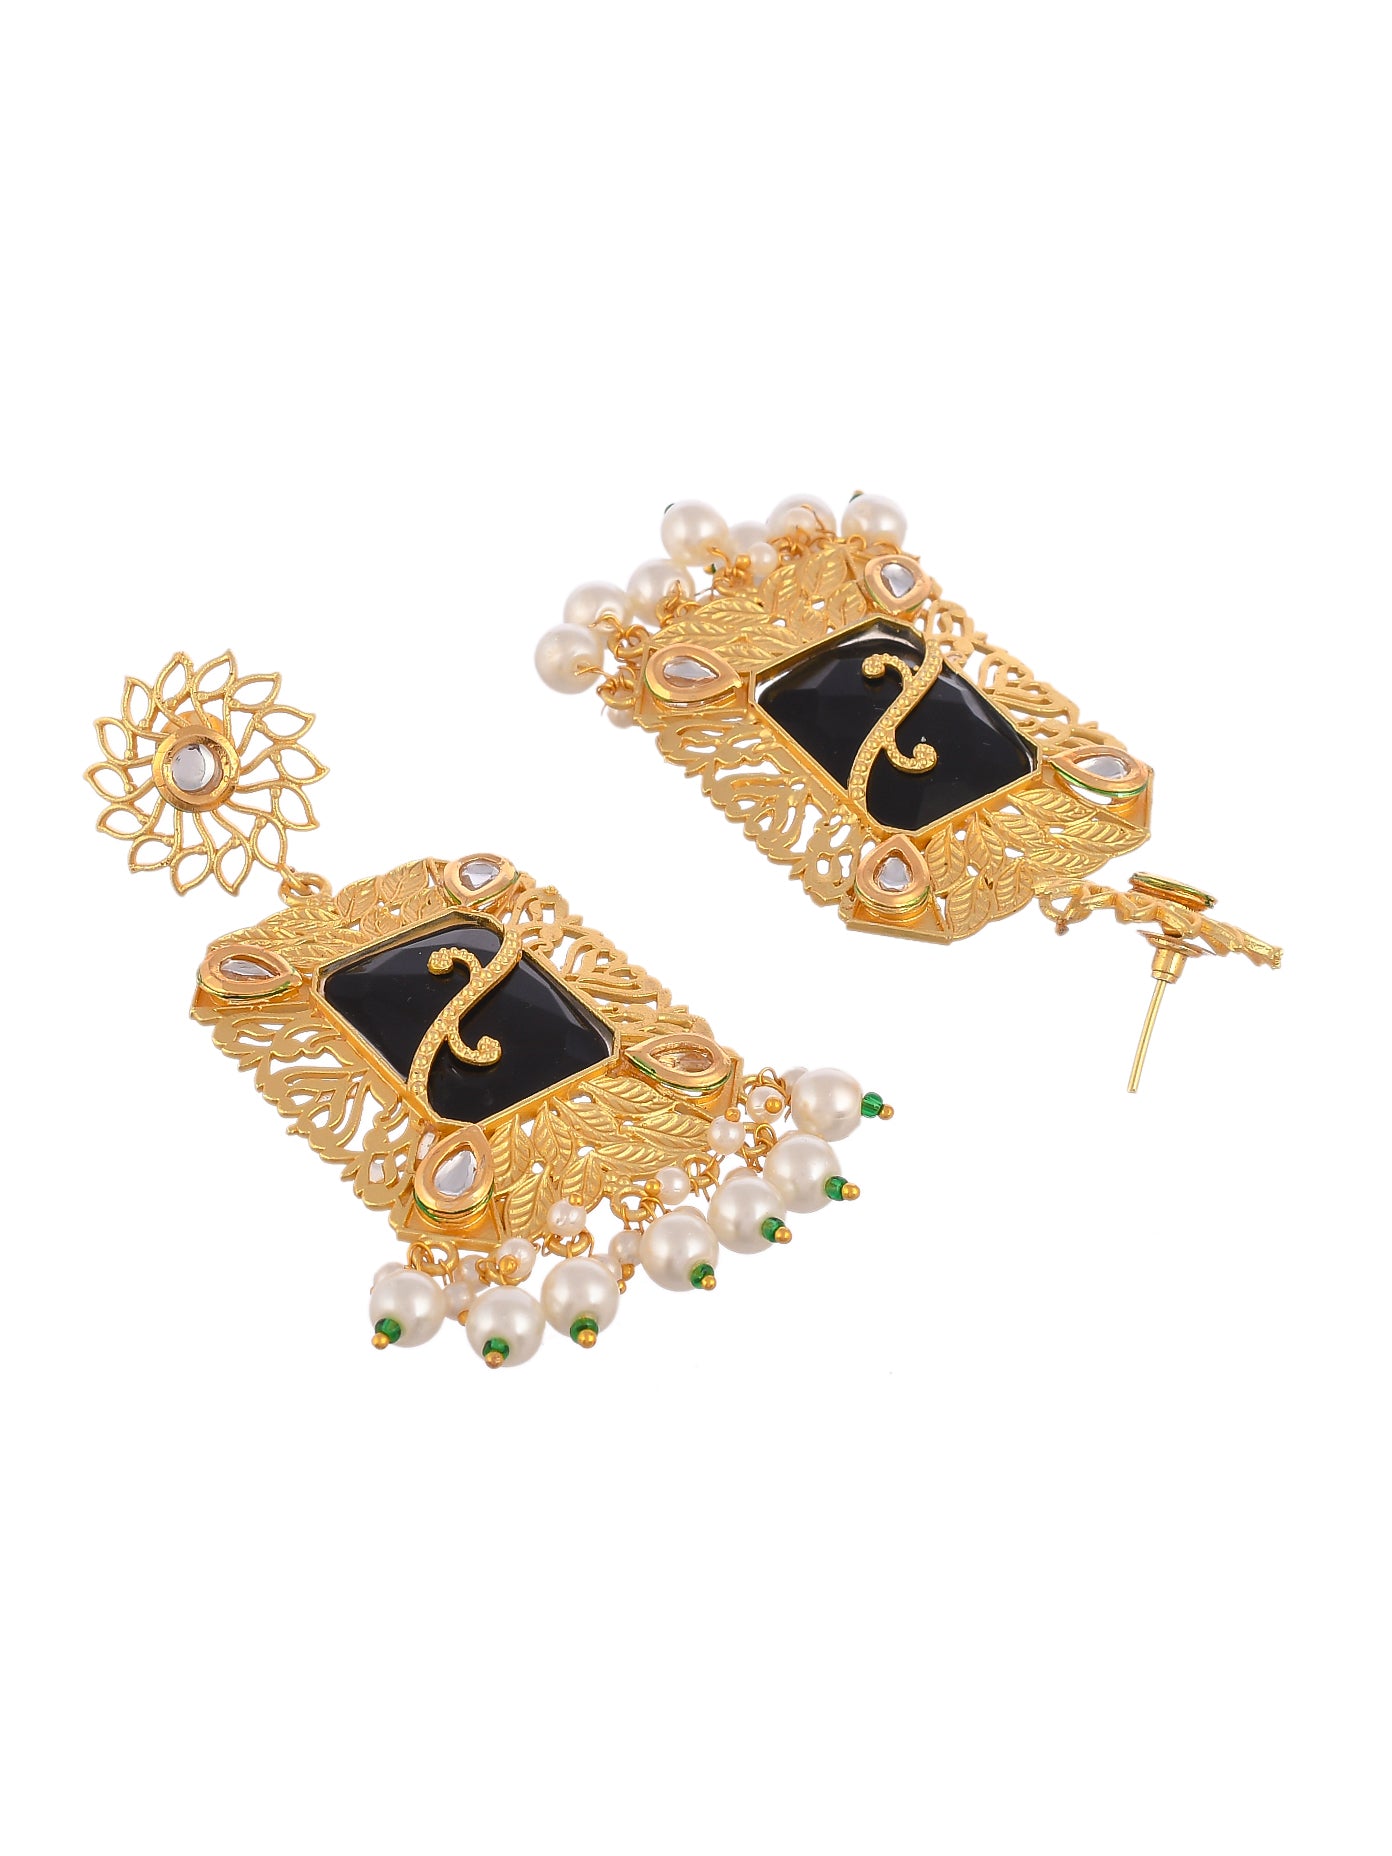 Gold Plated Filigree Traditional Earring